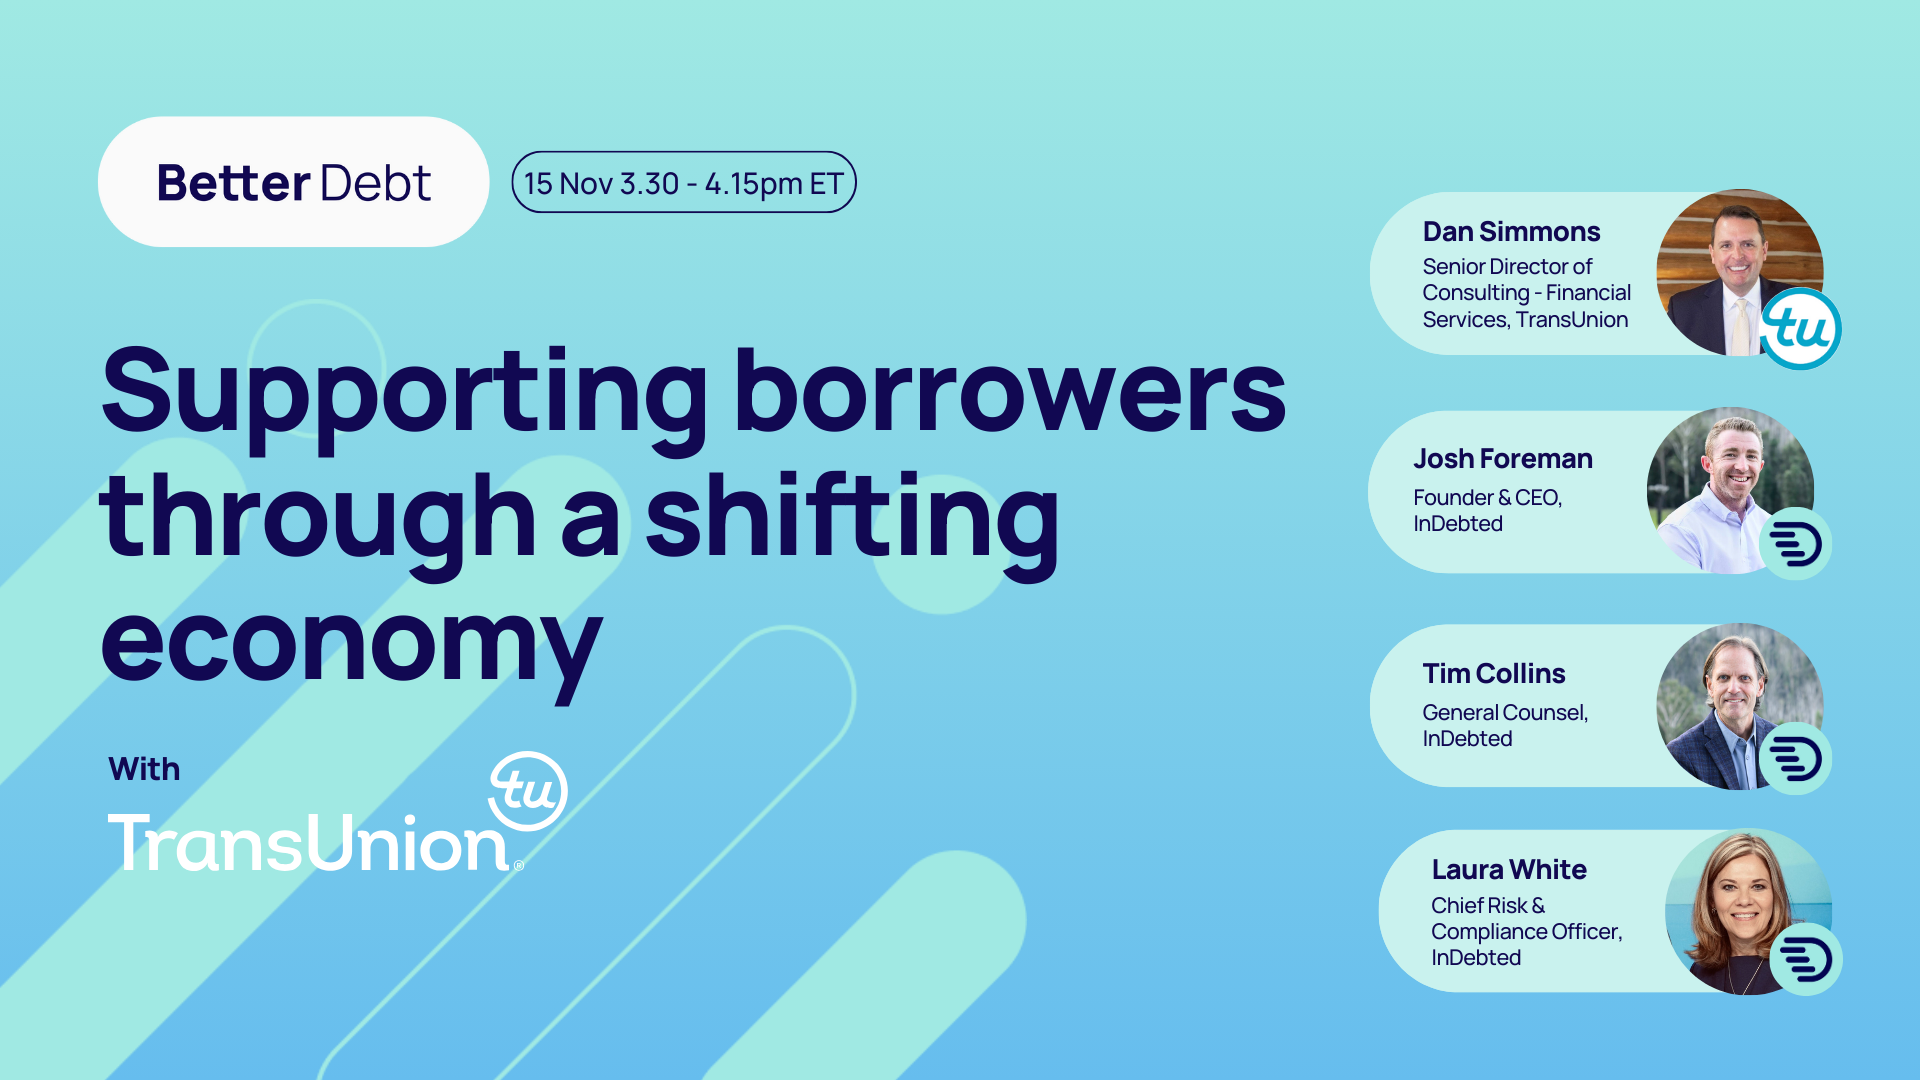 Better Debt - Supporting borrowers through a shifting economy